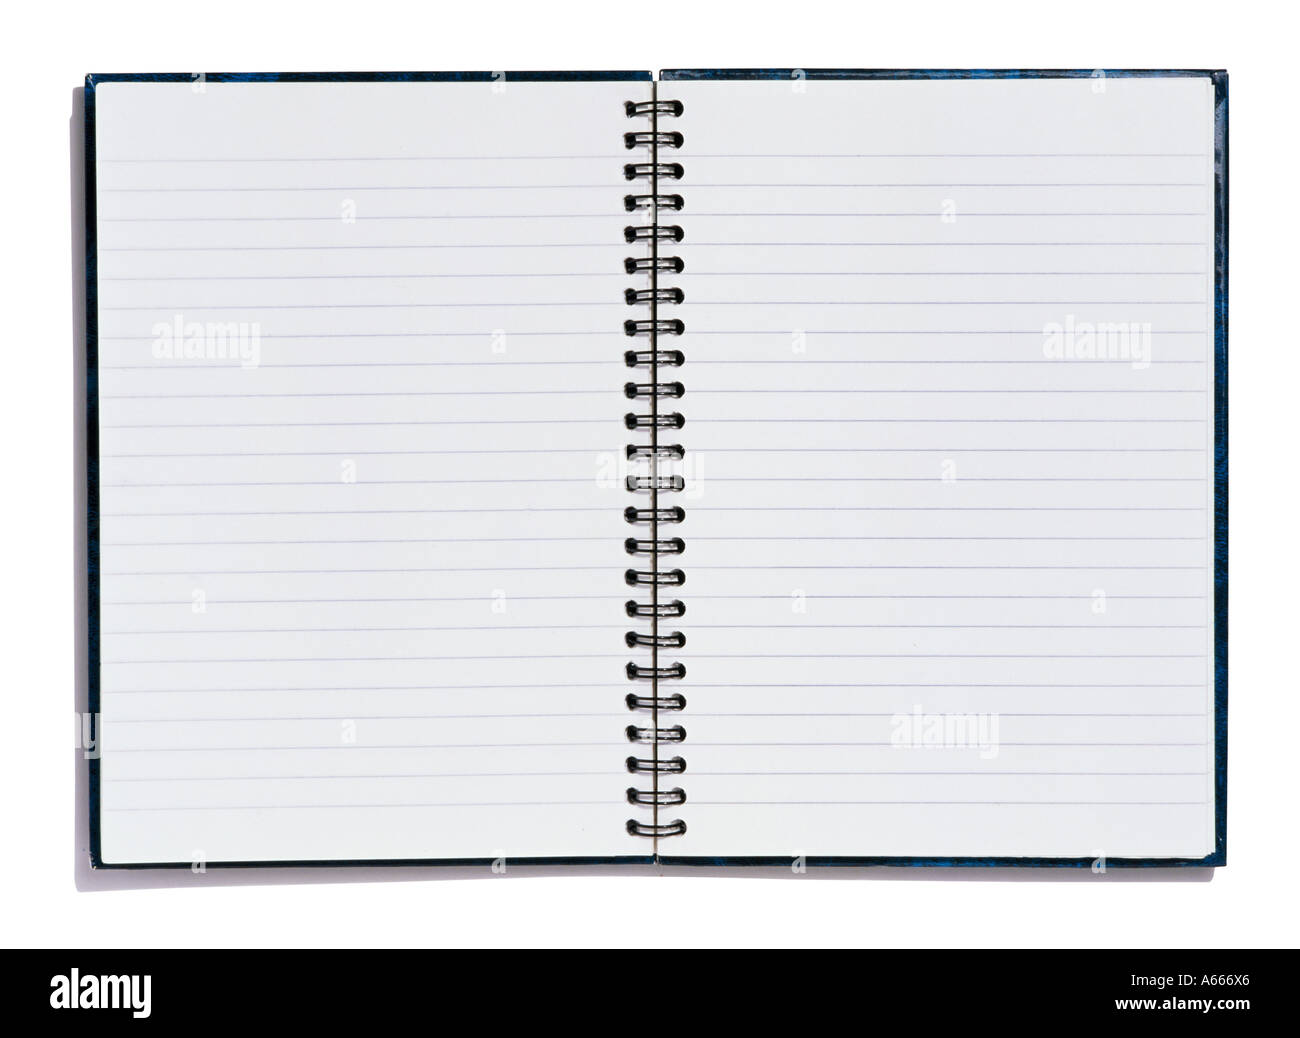 An open black spiral bound notebook with lined pages Stock Photo